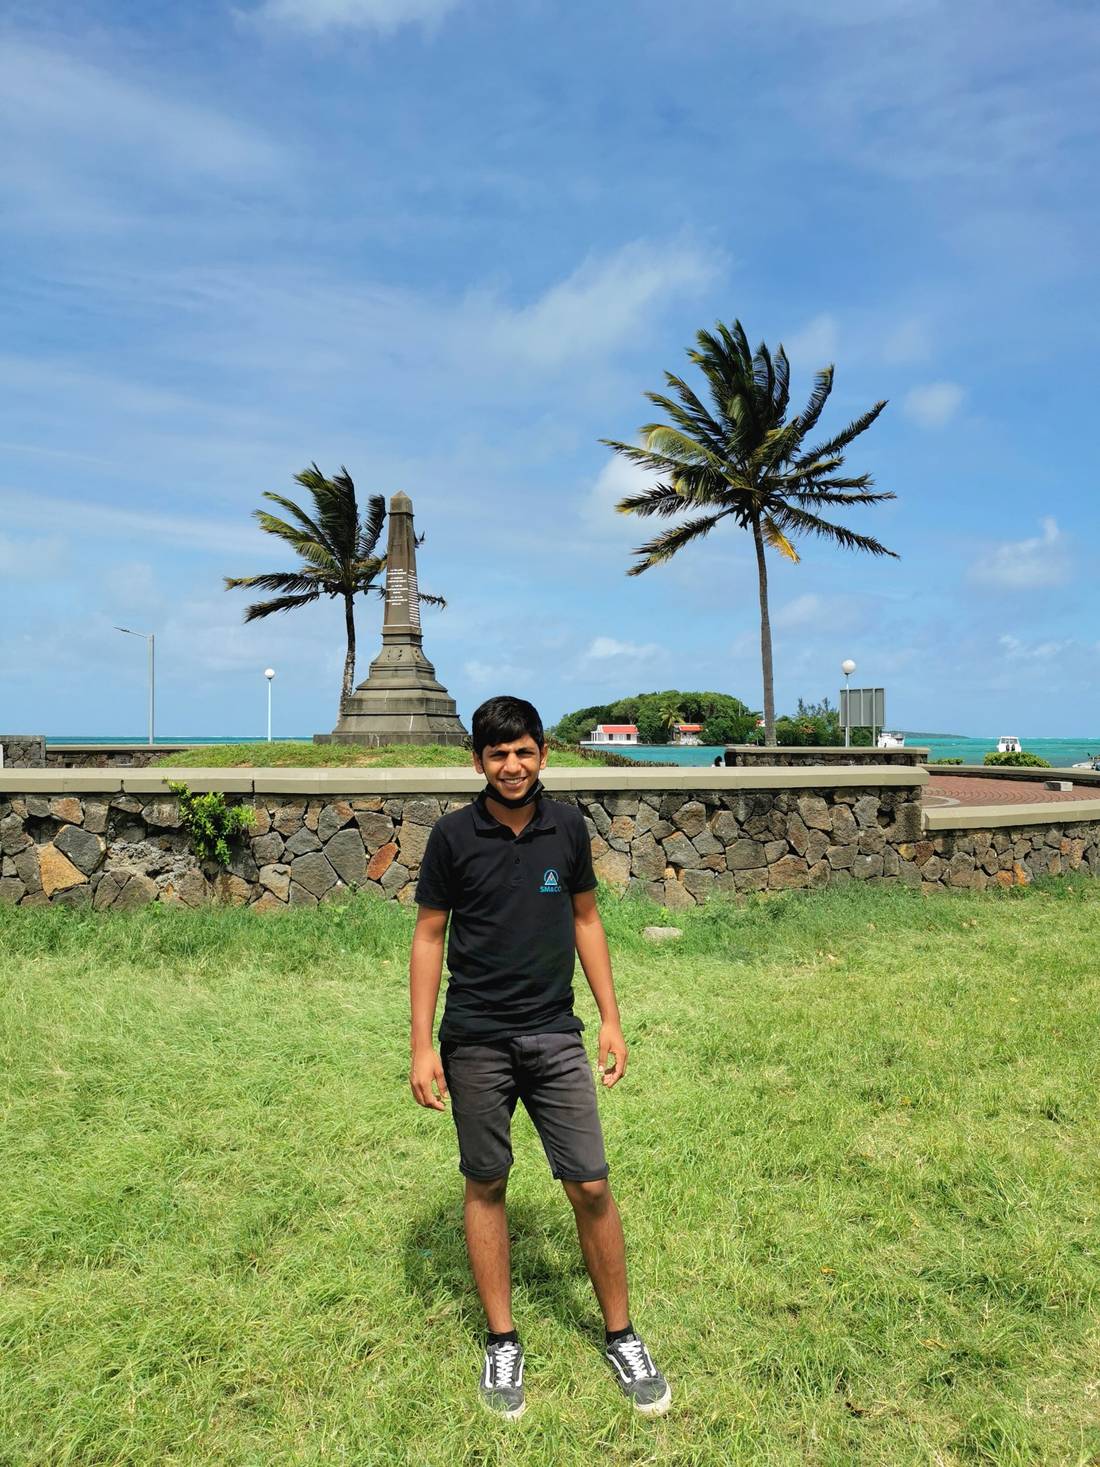 My nephew Zubair who is helping me at my restaurant since a month now, he is here posing in front of a memorial statue for people who died at sea...